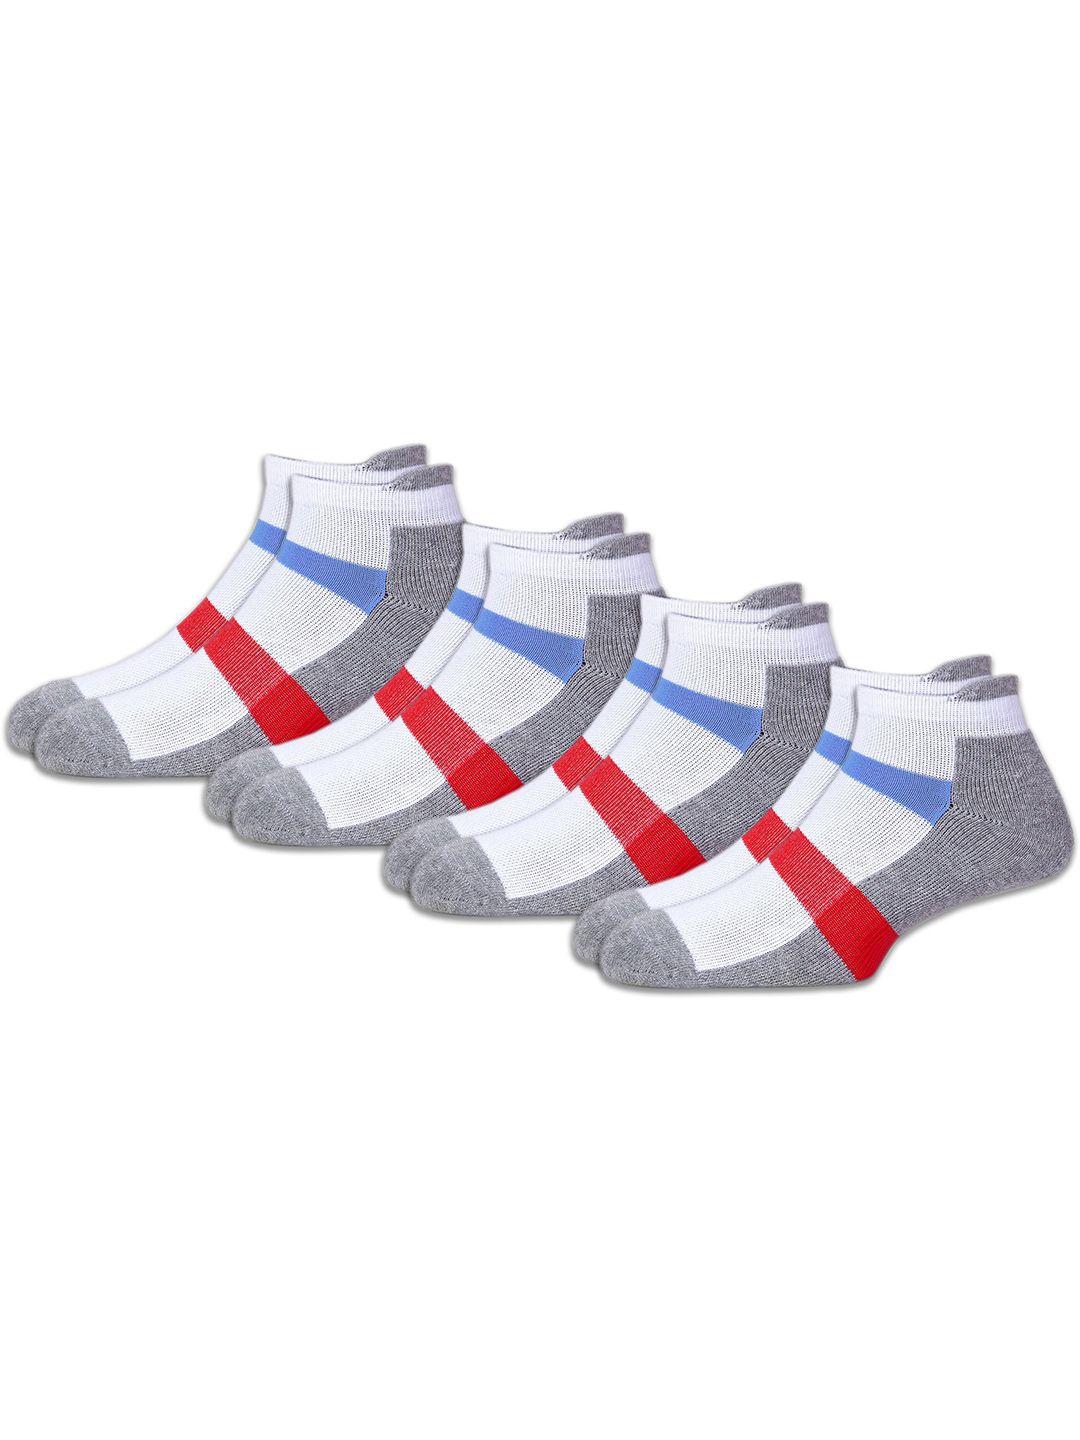 rc. royal class men pack of 4 patterned cotton breathable ankle length socks